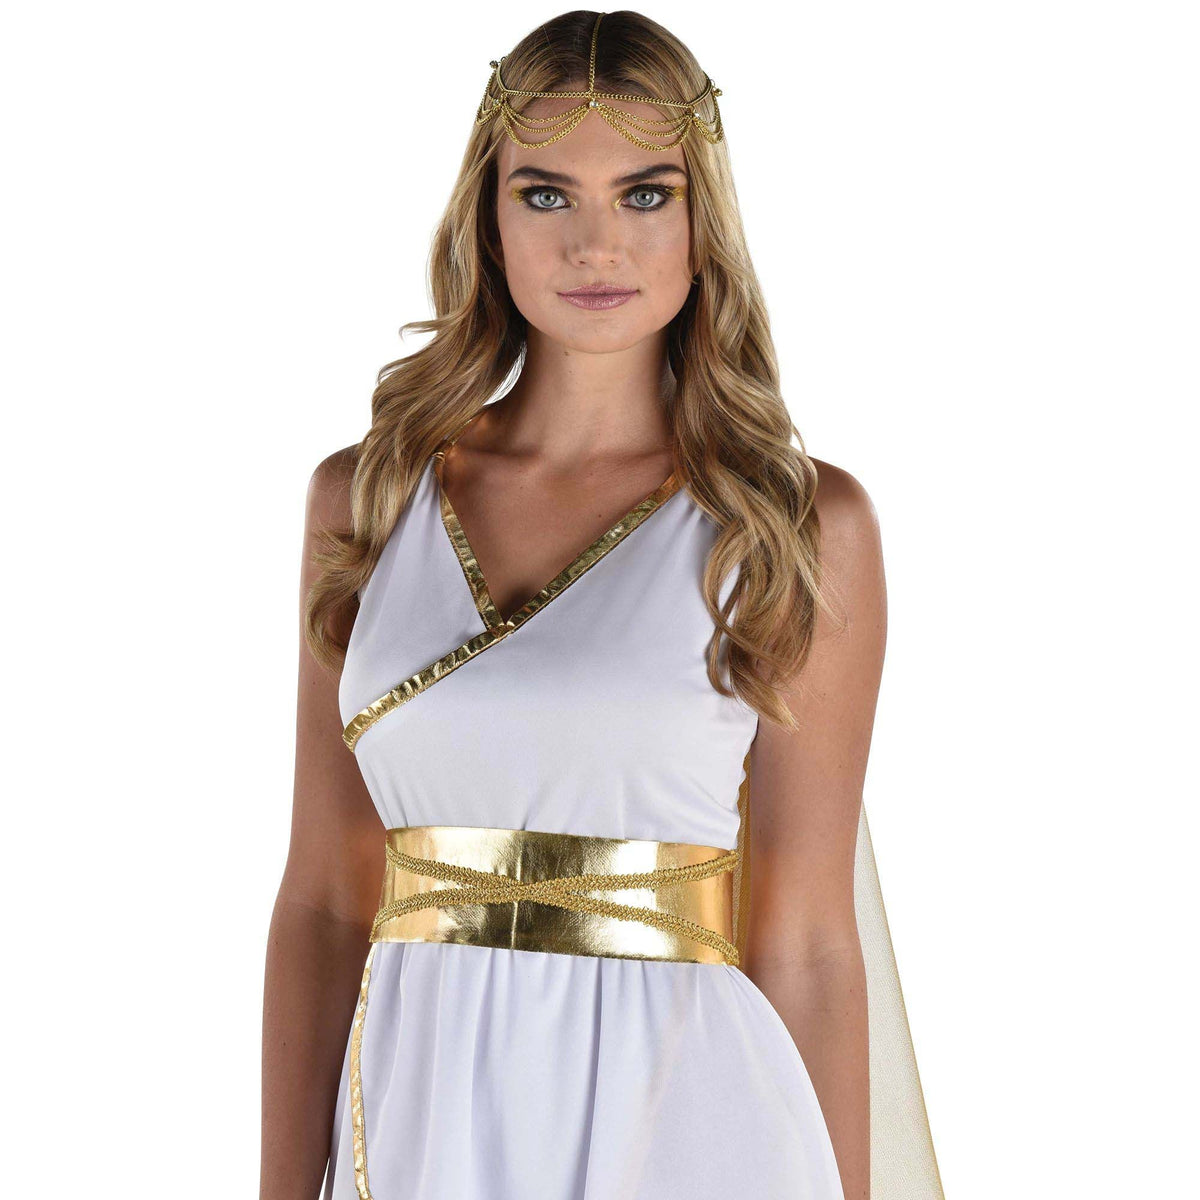 HALLOWEEN COSTUME CO. Costume Accessories Gold Hair Jewelry for Adults